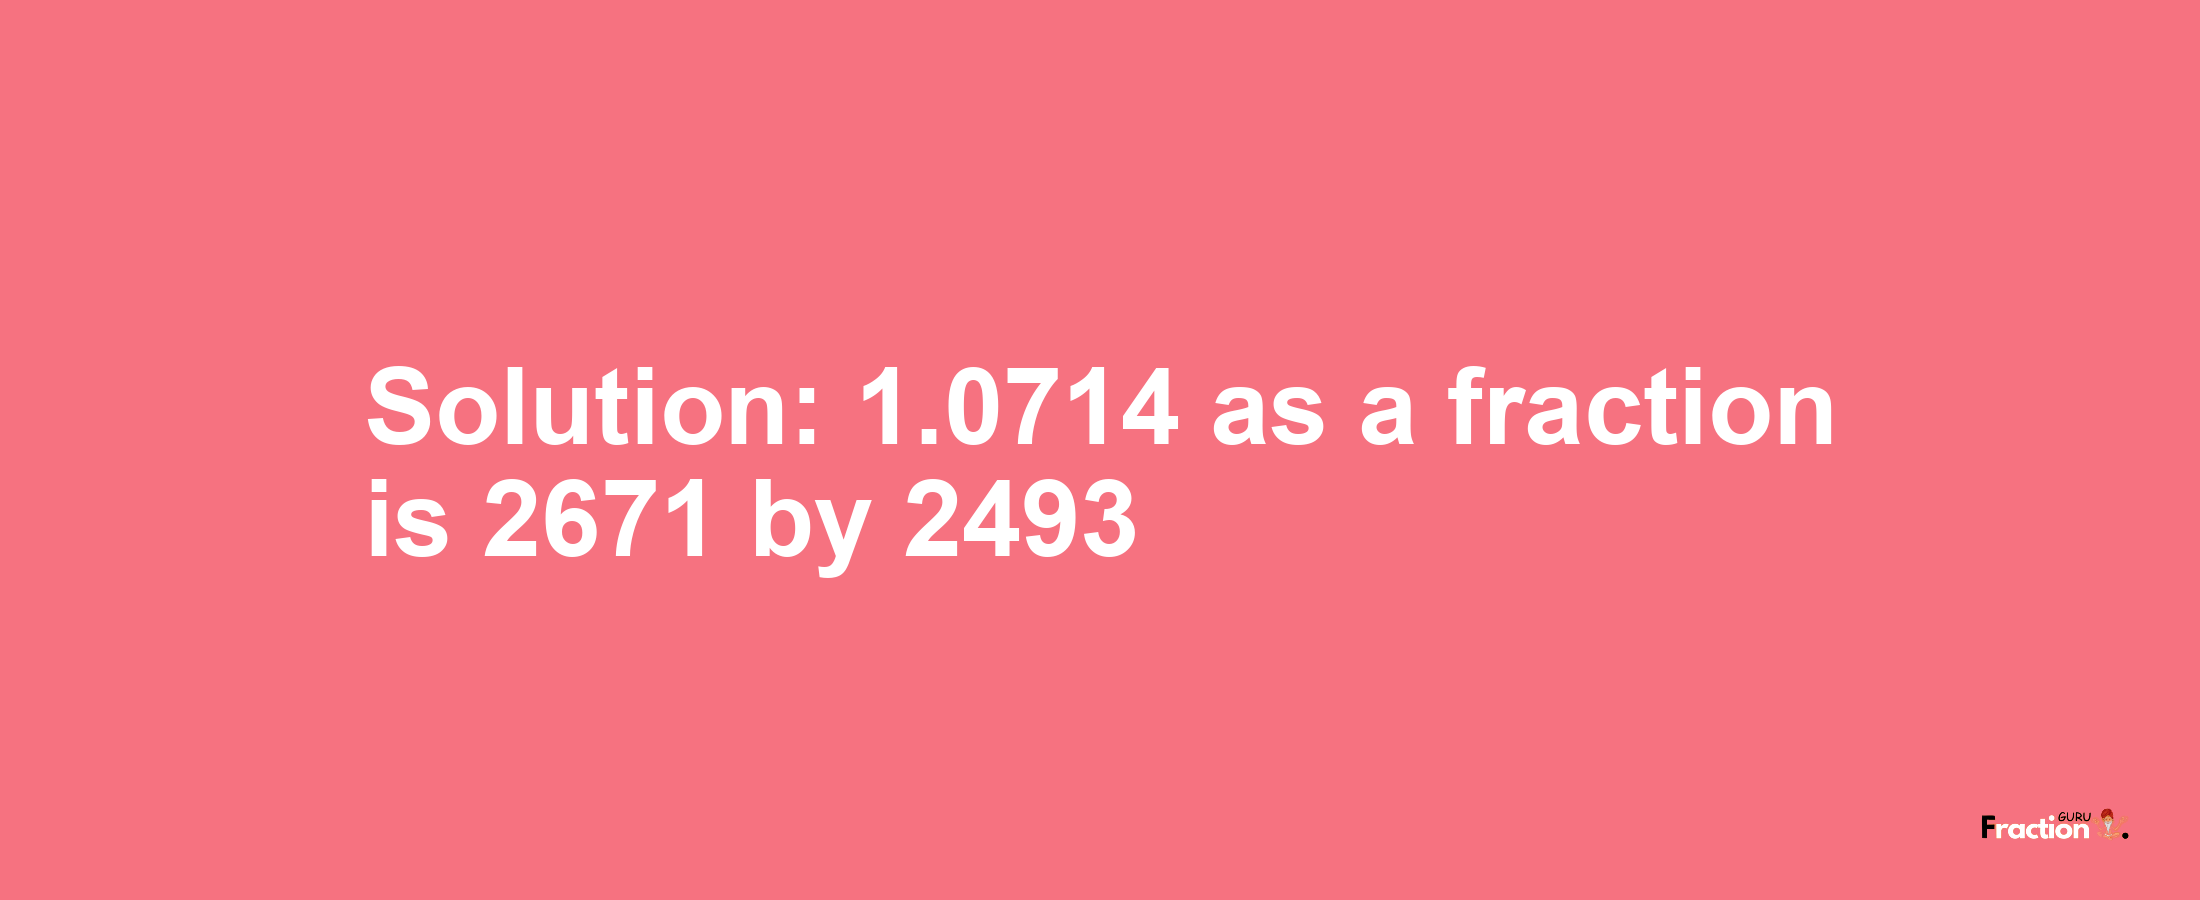 Solution:1.0714 as a fraction is 2671/2493